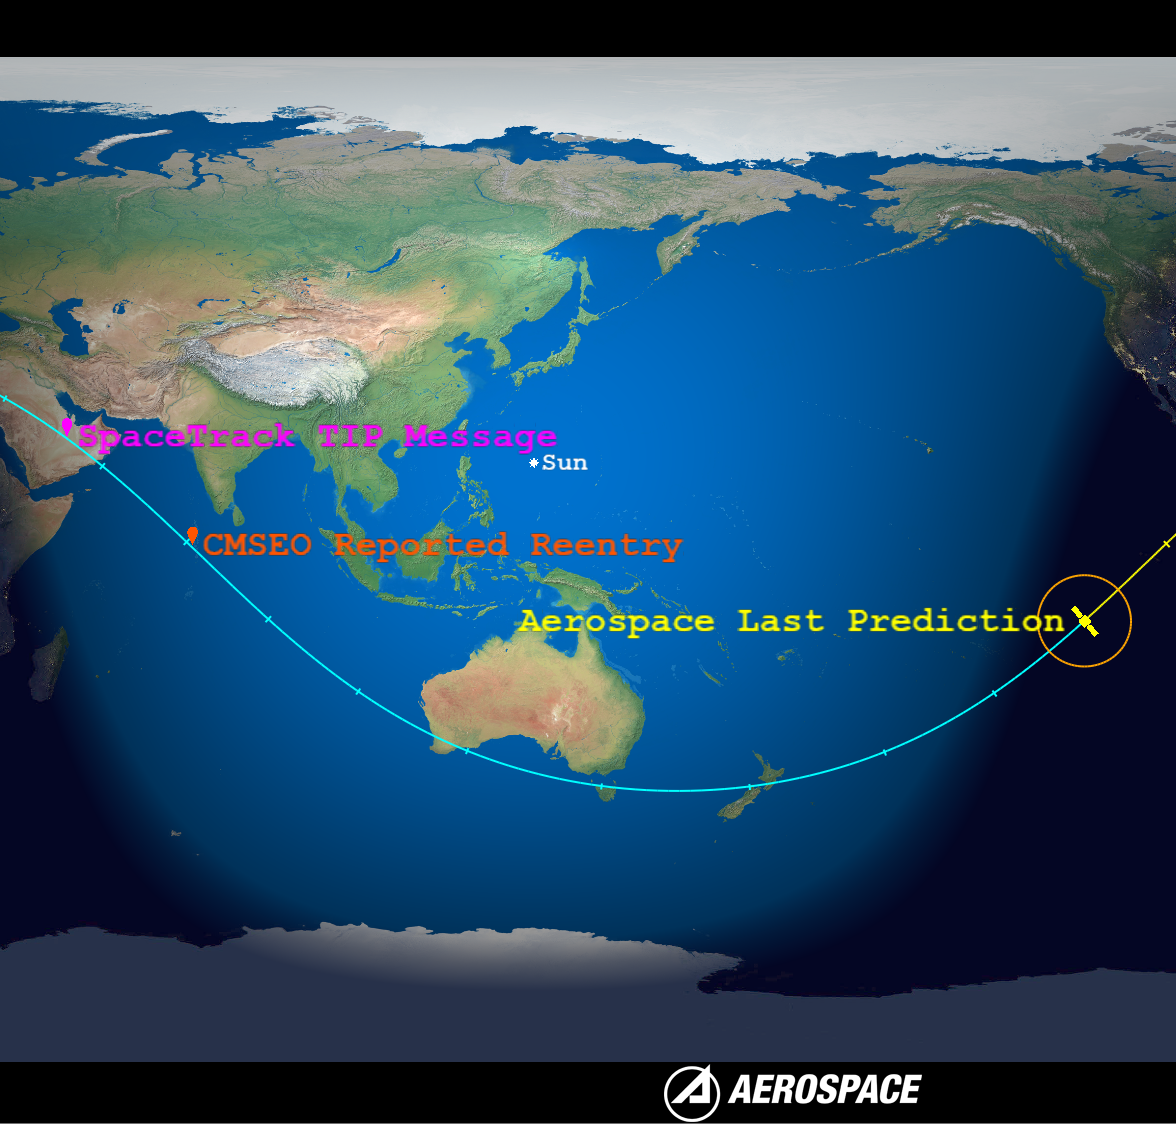 Aerospace's reentry prediction compared with reported reentry sites.